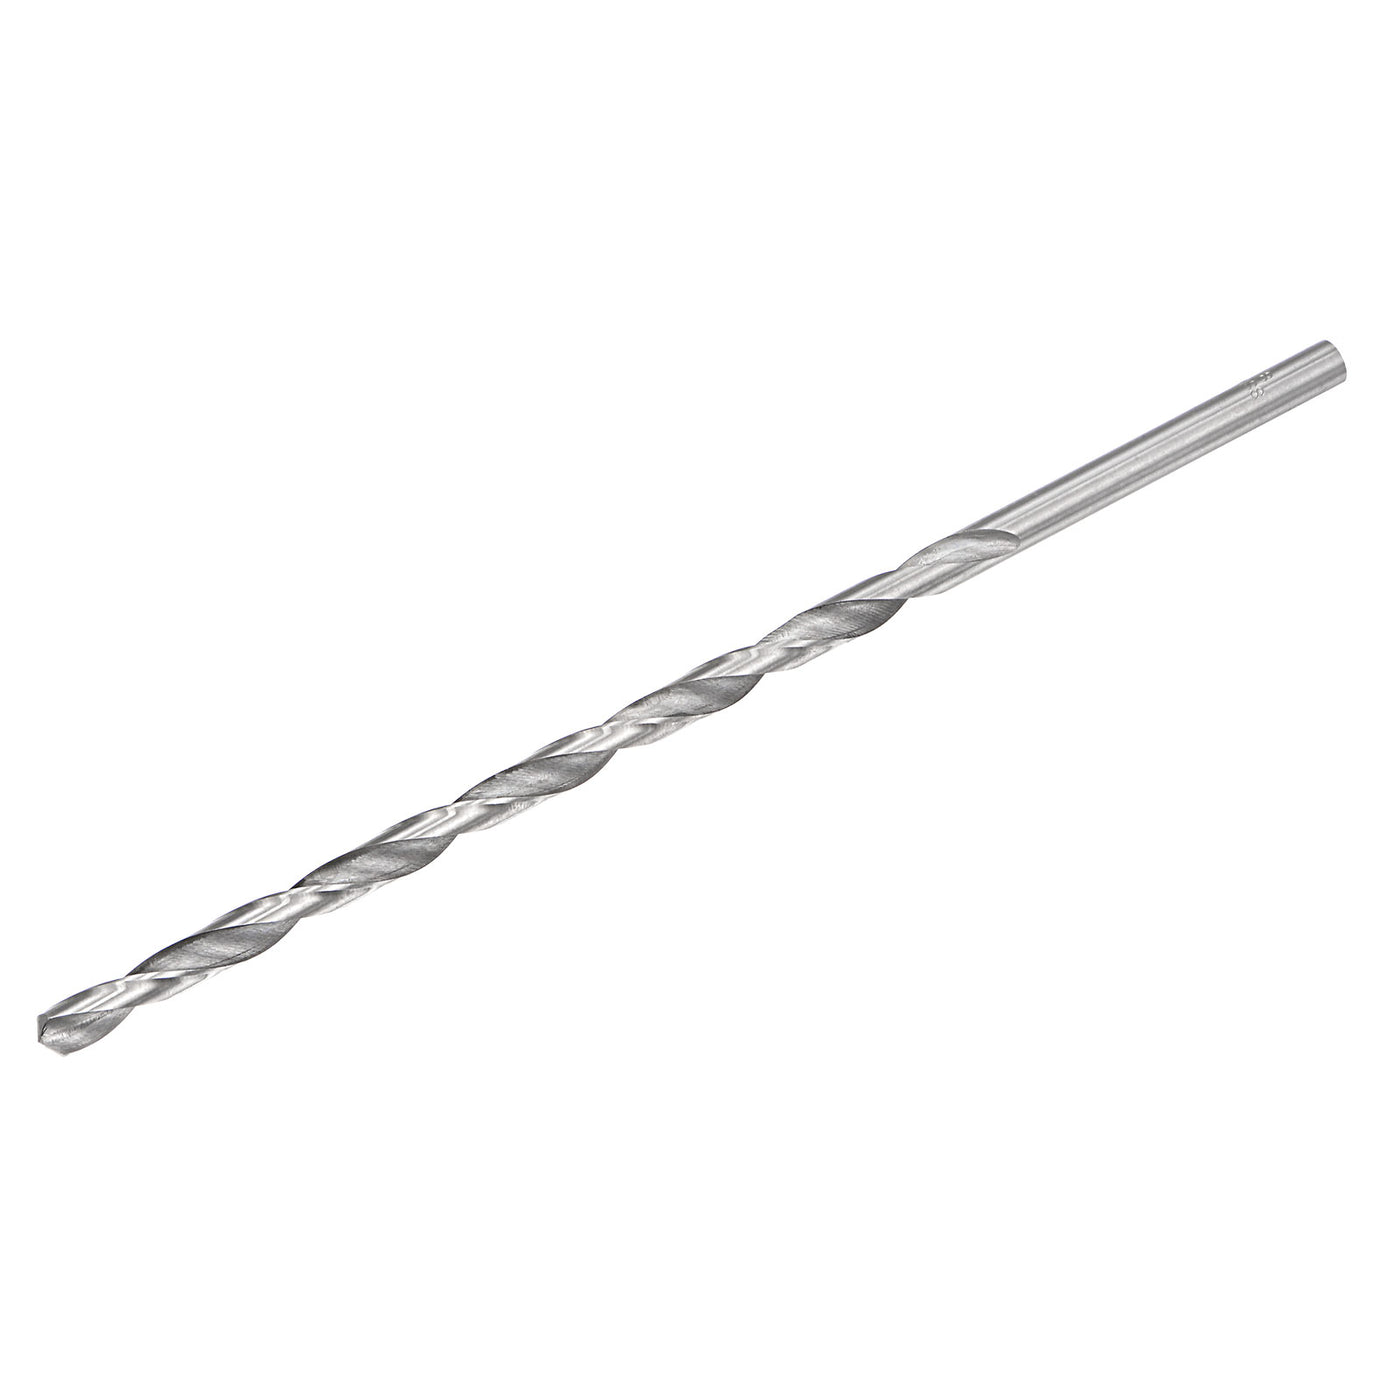 uxcell Uxcell 8mm Twist Drill Bits, High-Speed Steel Extra Long Drill Bit 250mm Length